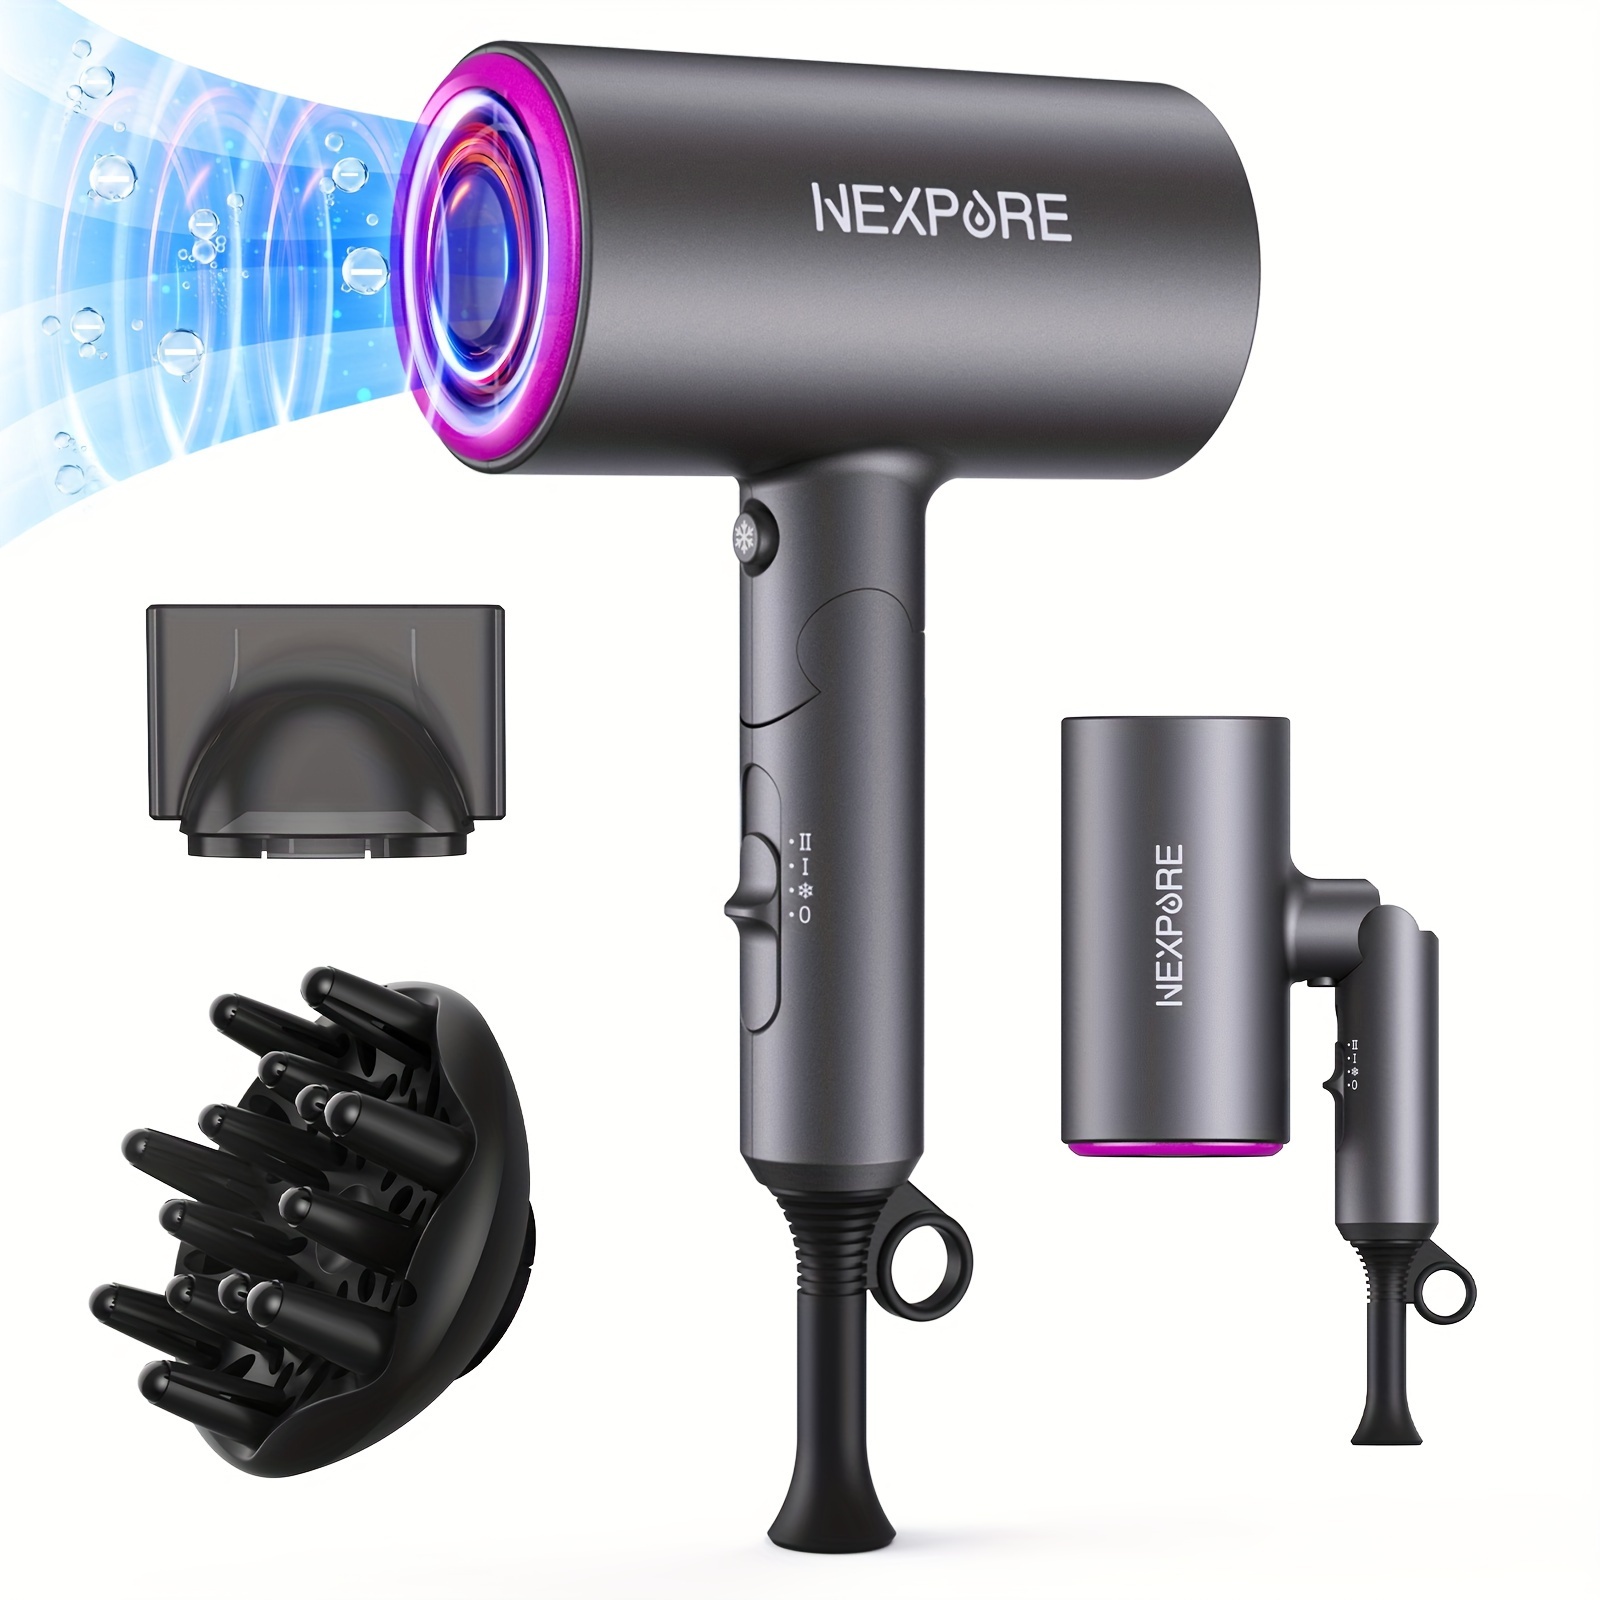 

Hair Dryer, Nexpure 1800w Professional Ionic Hairdryer For Hair Care, Powerful Hot/cool Wind Blow Dryer, 2 Magnetic Attachments, Safety Plug (dark Grey)